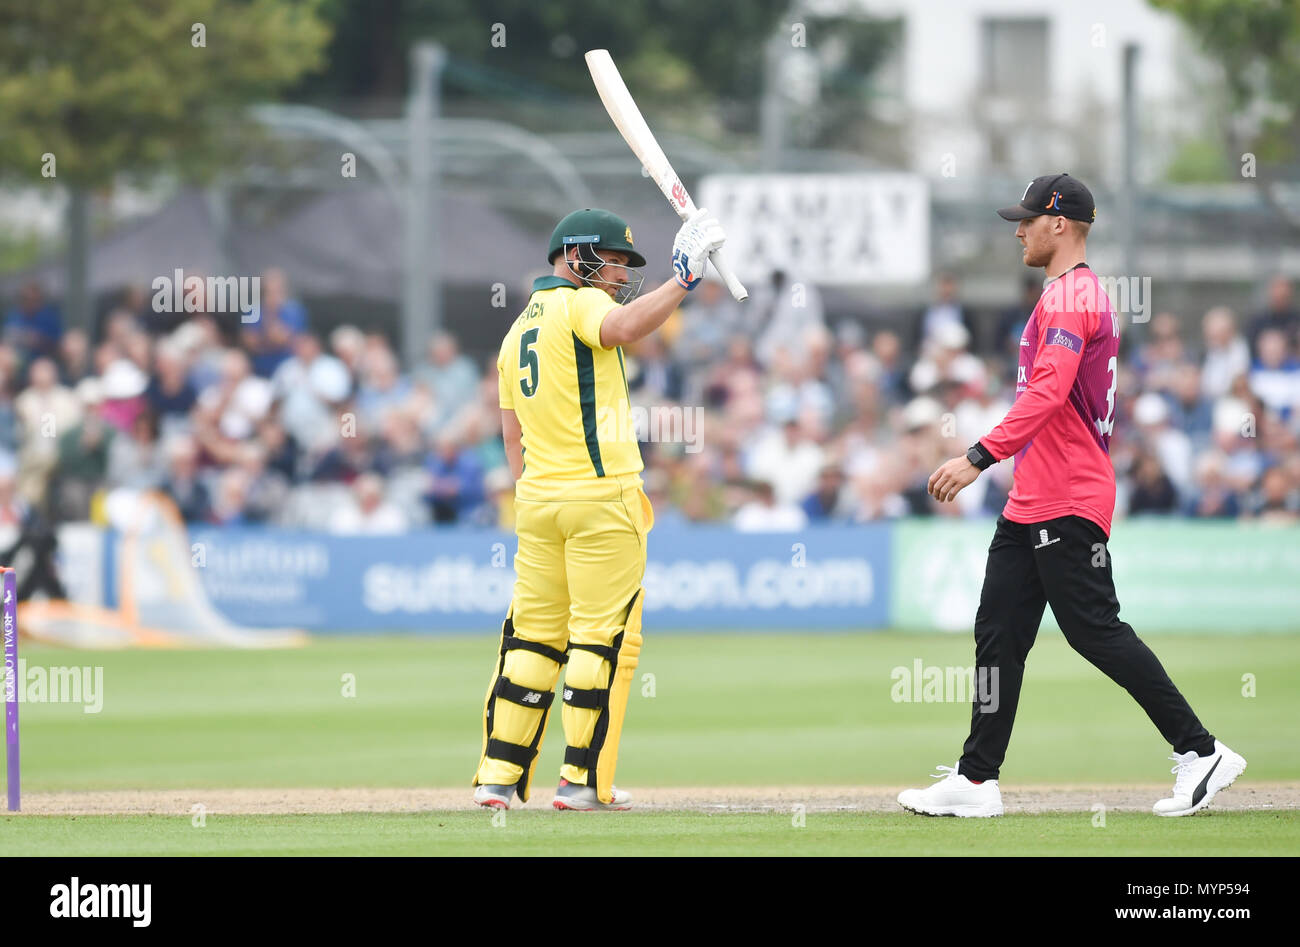 Aaron Finch of Australia reaches his half century during the 50 over cricket tour match between Sussex and Australia at The 1st Central County Ground in Hove. 07 June 2018 Stock Photo